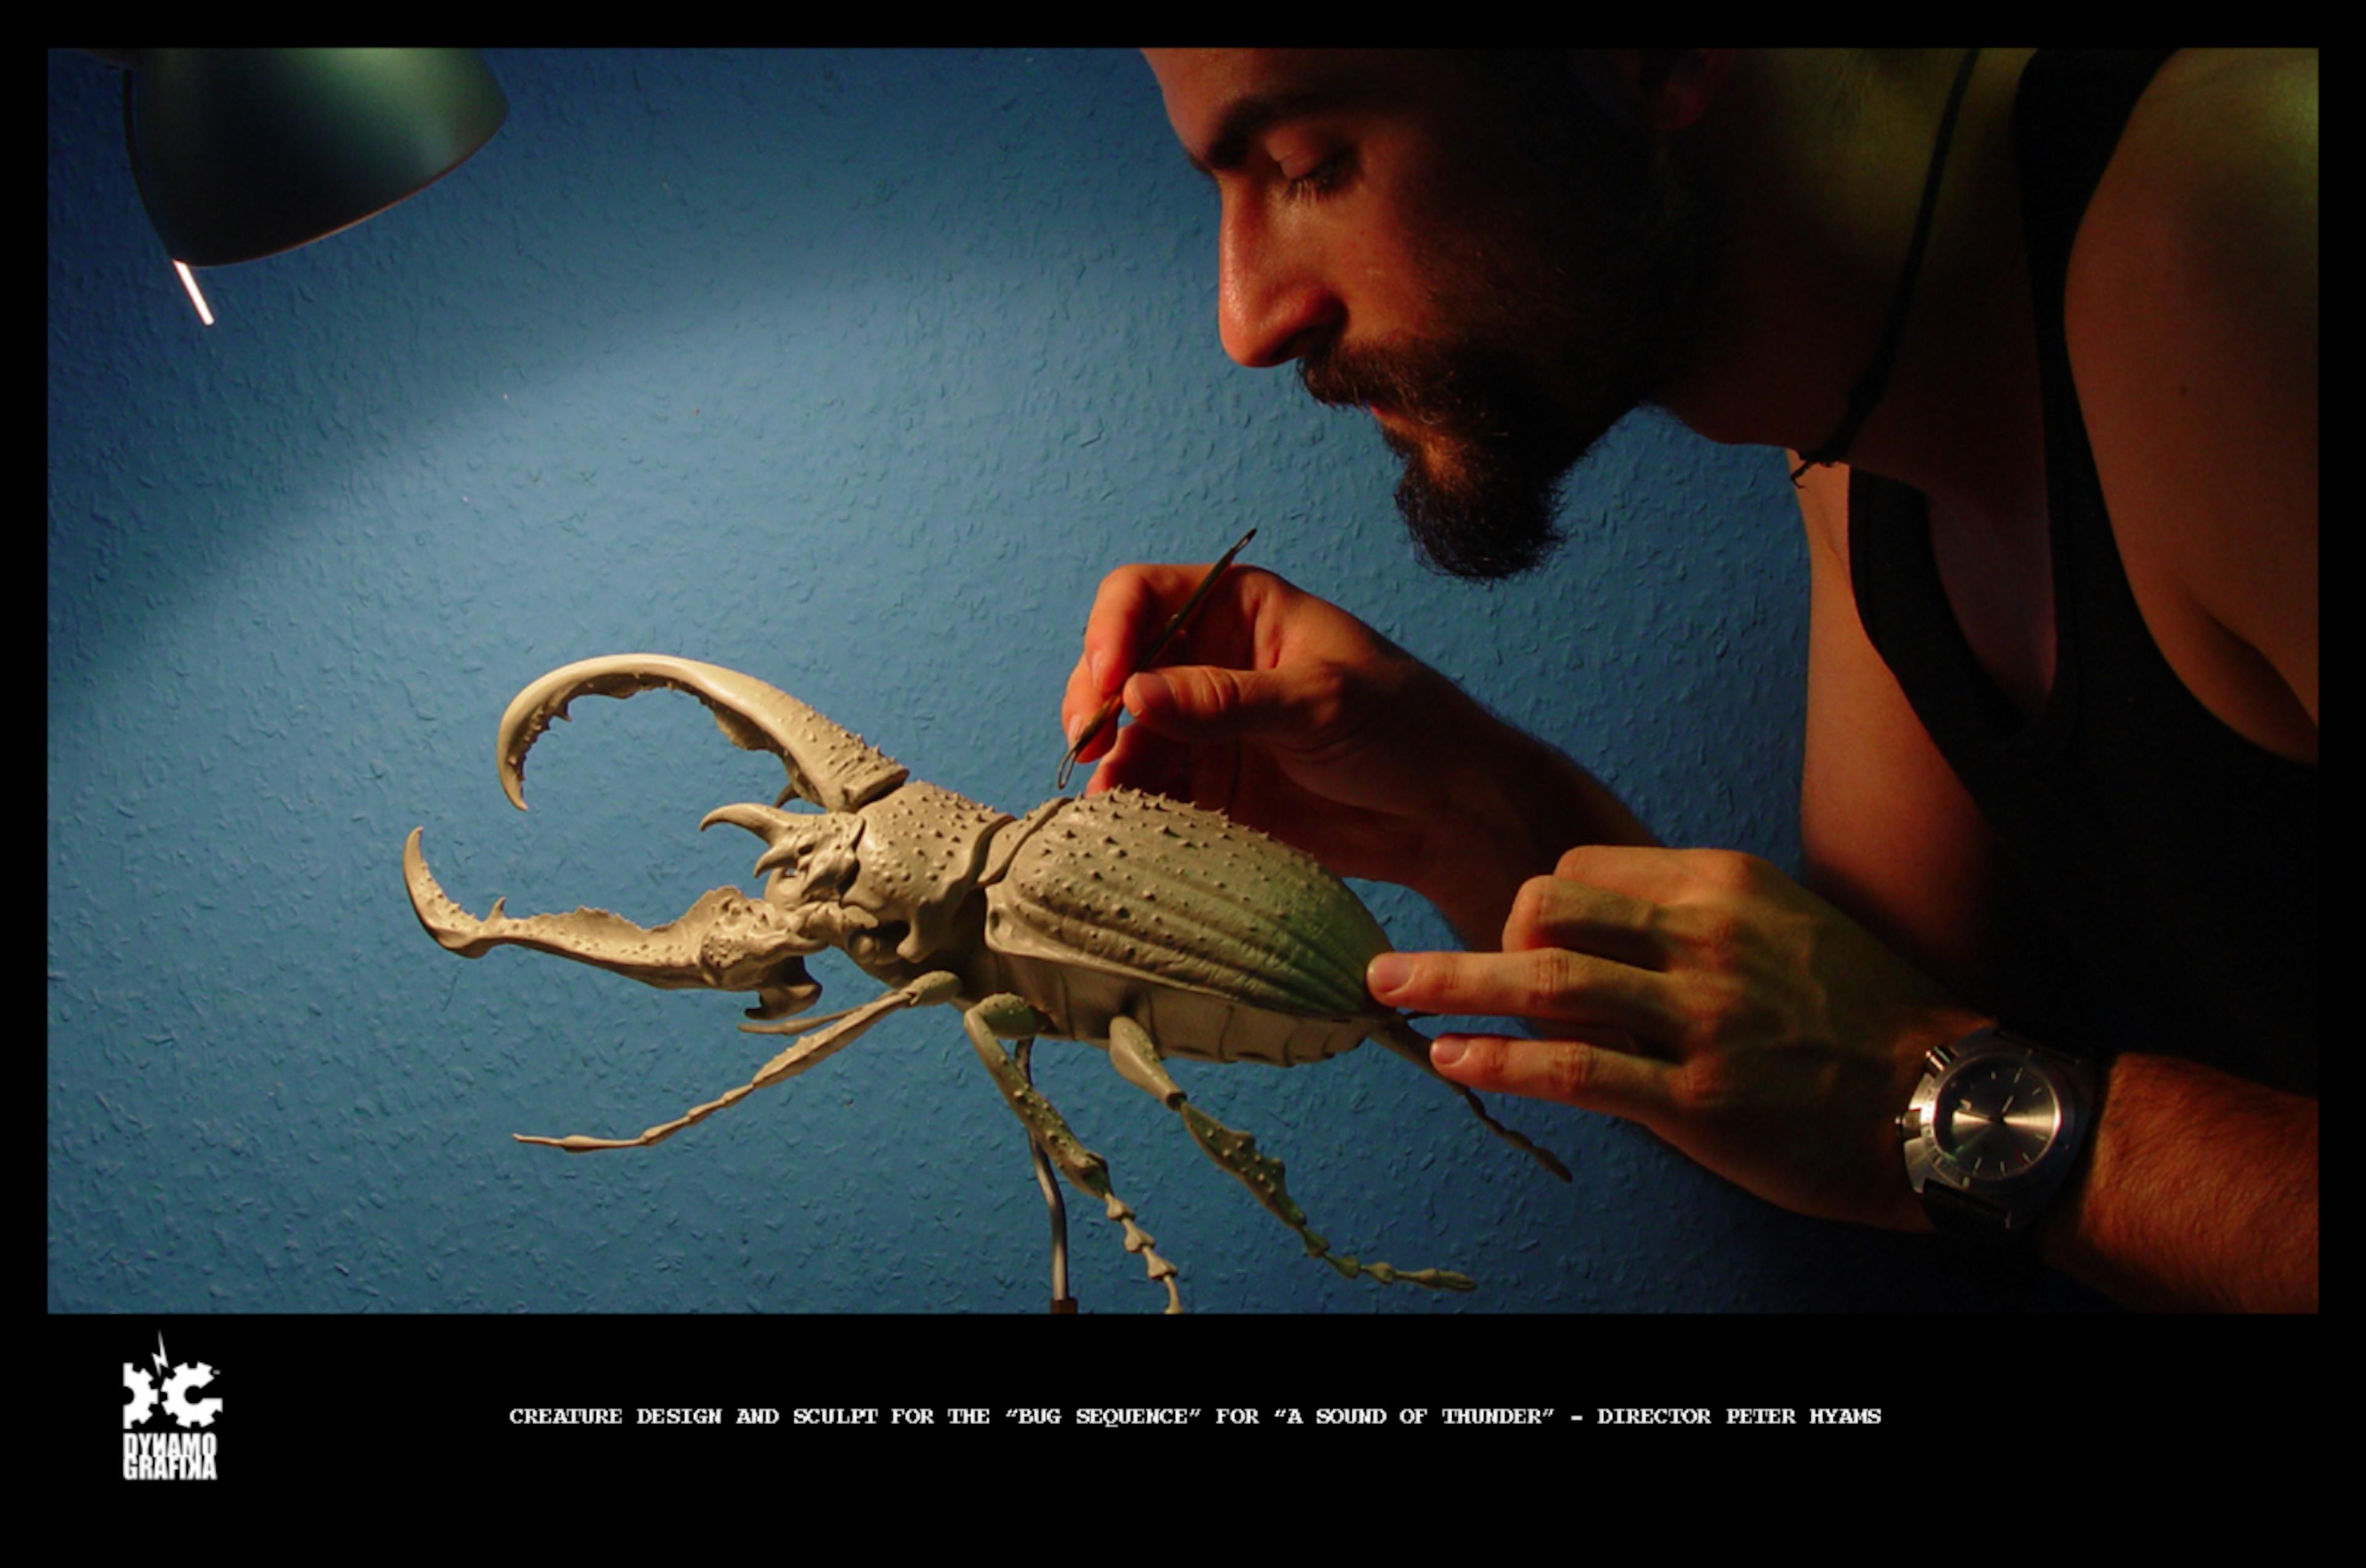 Photograph of a man making a model of a bug